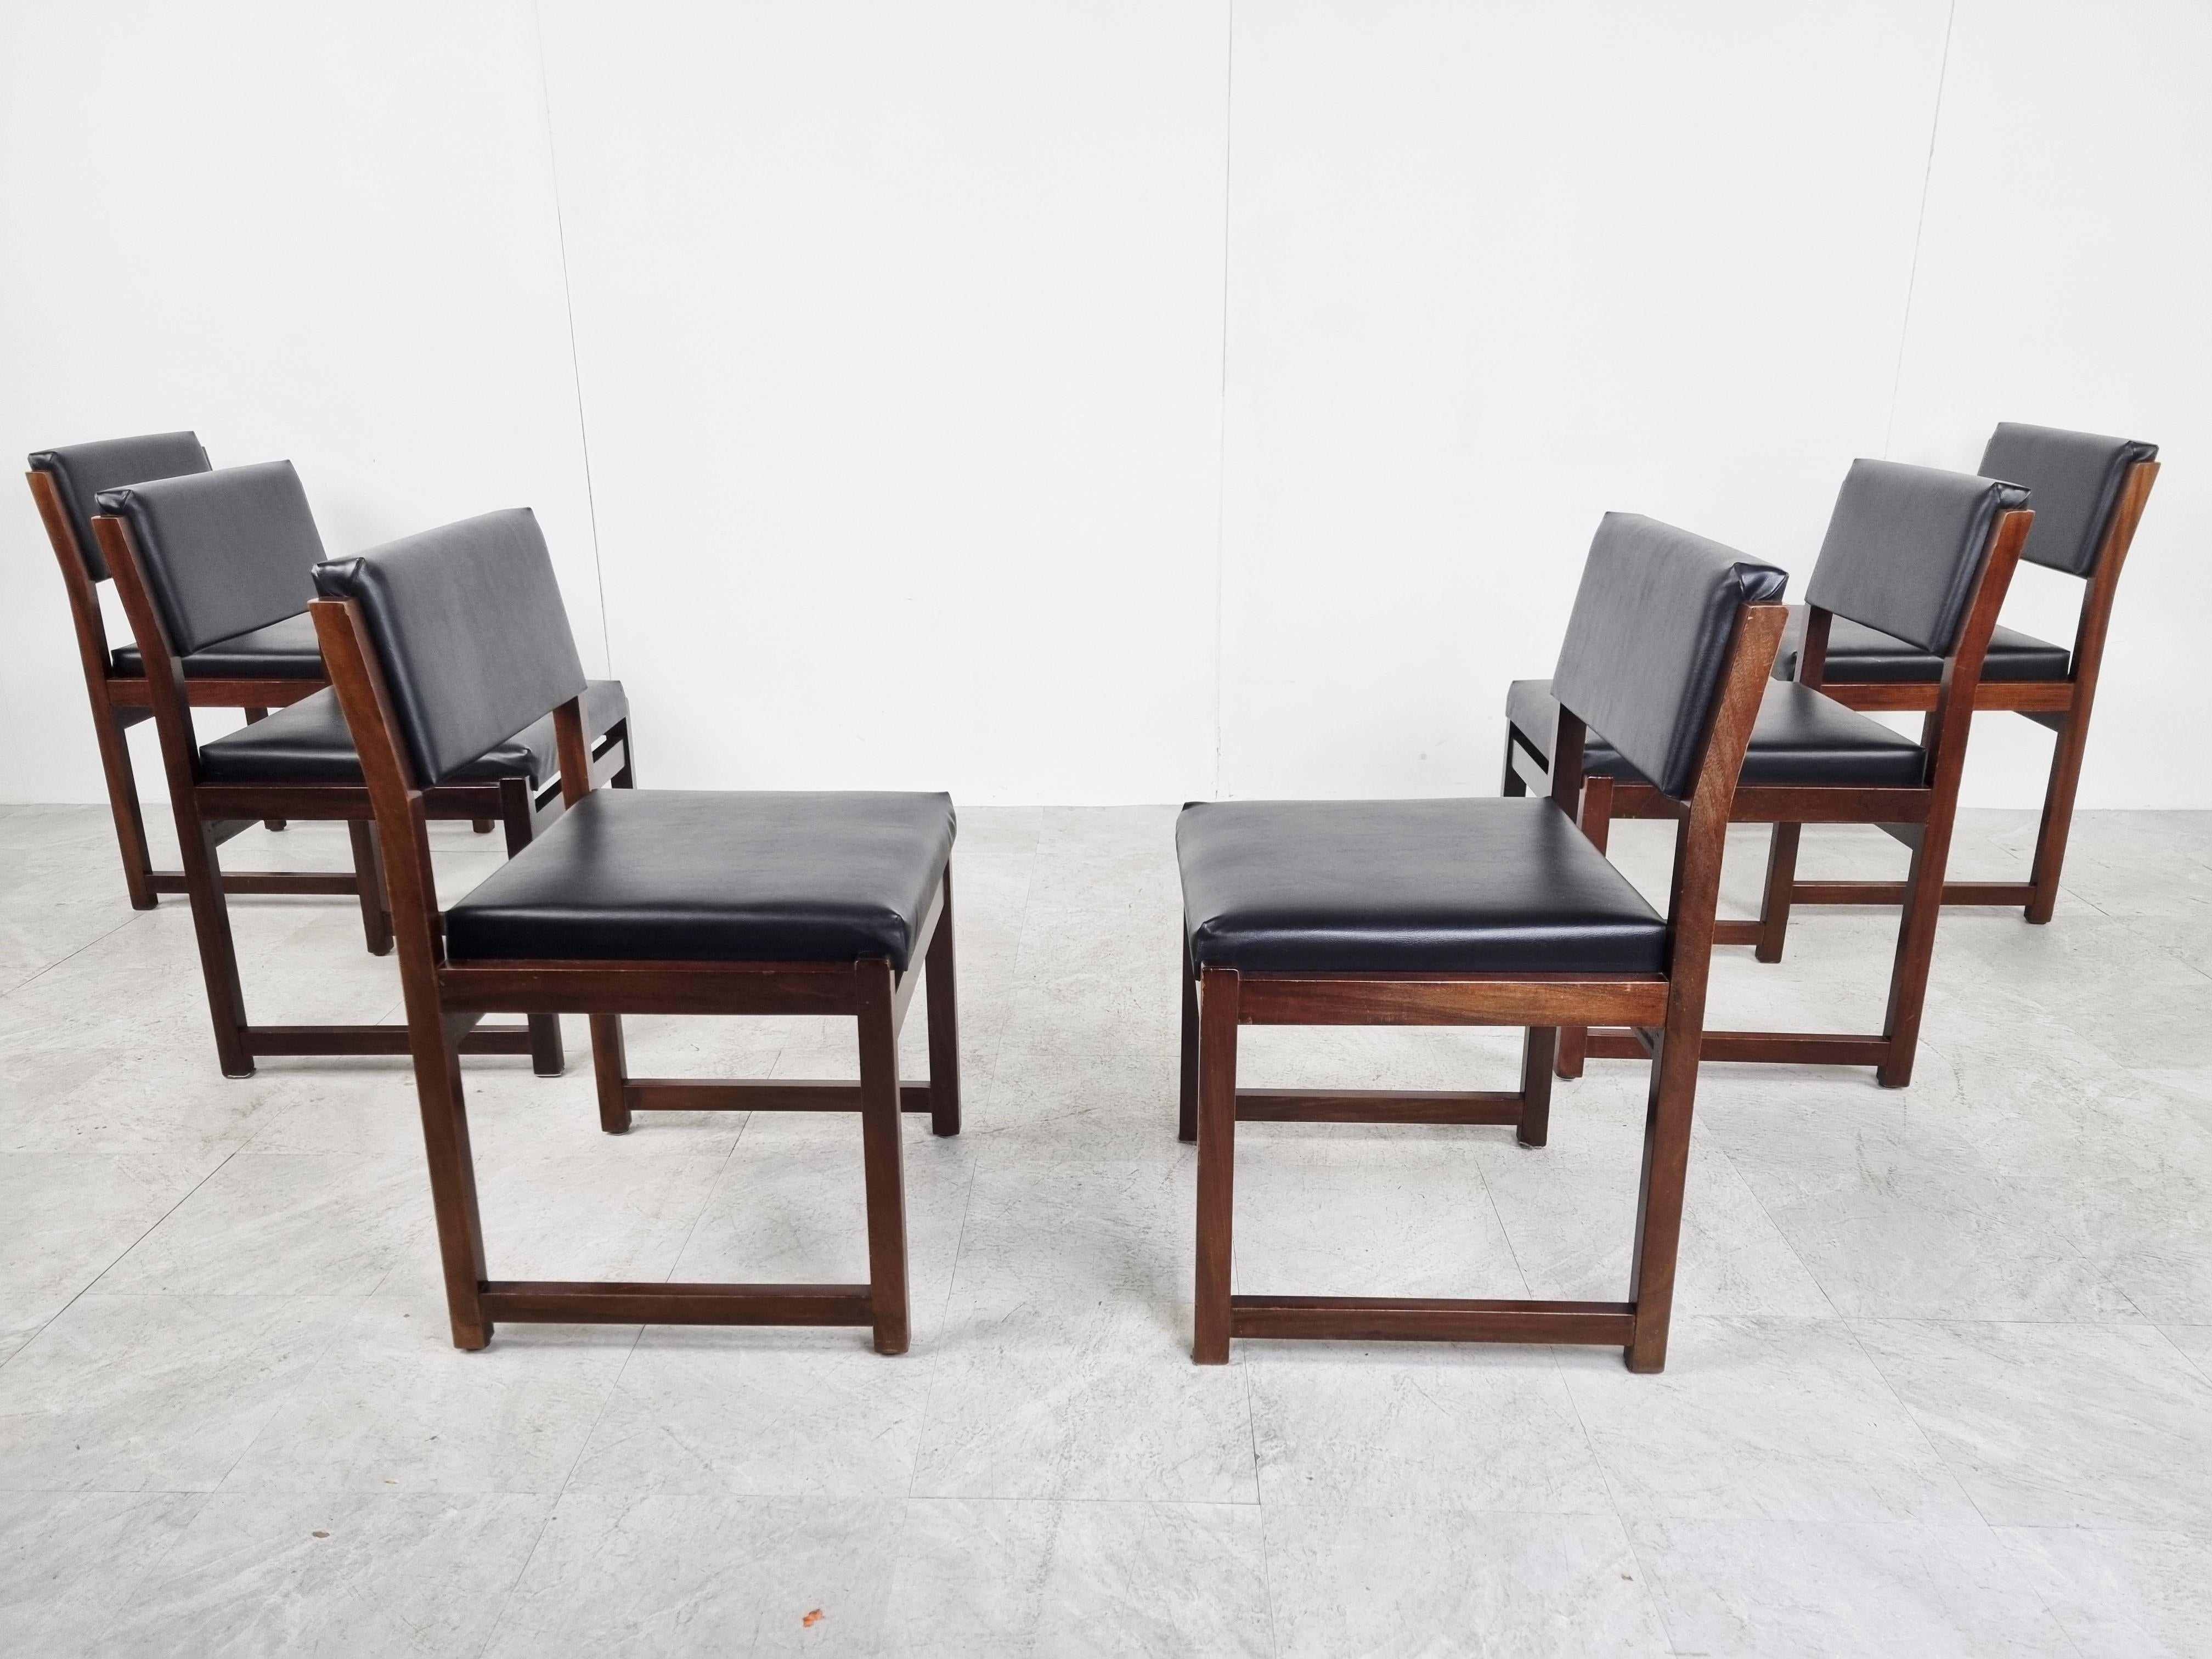 Leather Set of 6 Brutalist Dining Chairs by Emiel Veranneman for Decoene, 1970s For Sale